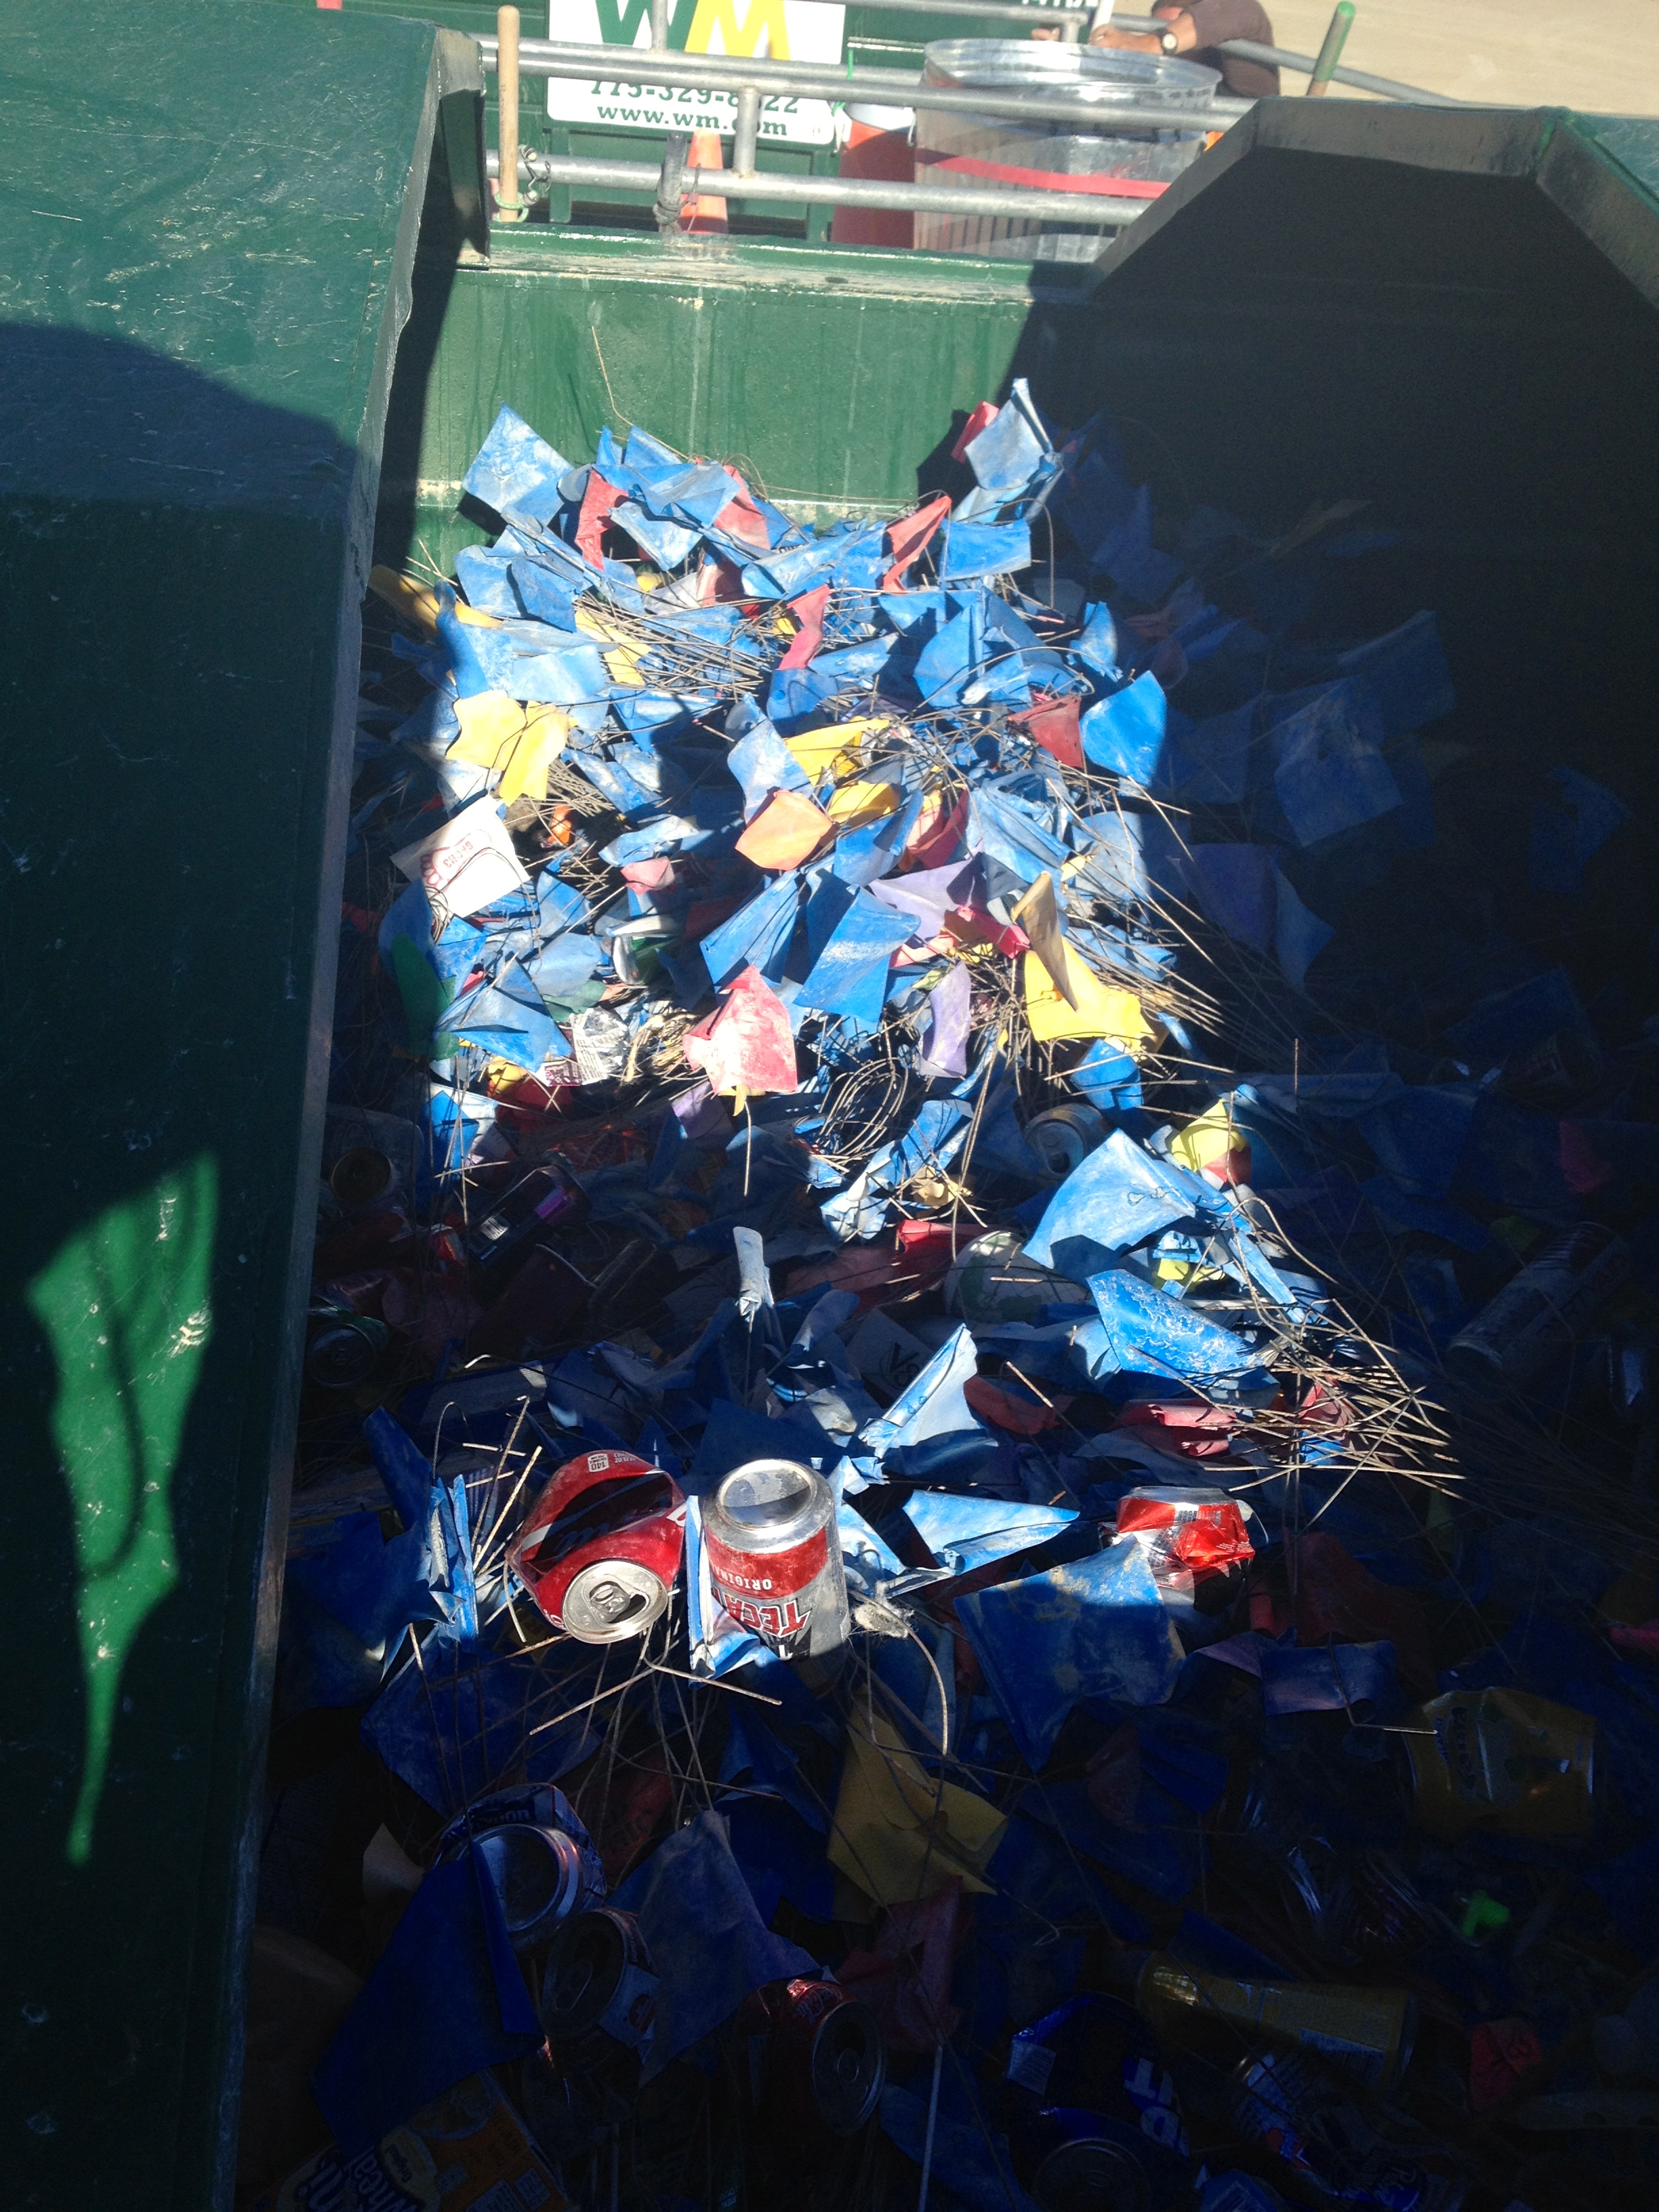 These are the placement flags, piled neatly in Resto's commingled recycling dumpster. As the Line Sweep crews advance over blocks, they take the flags, signifying the camp's been swept and scribed.